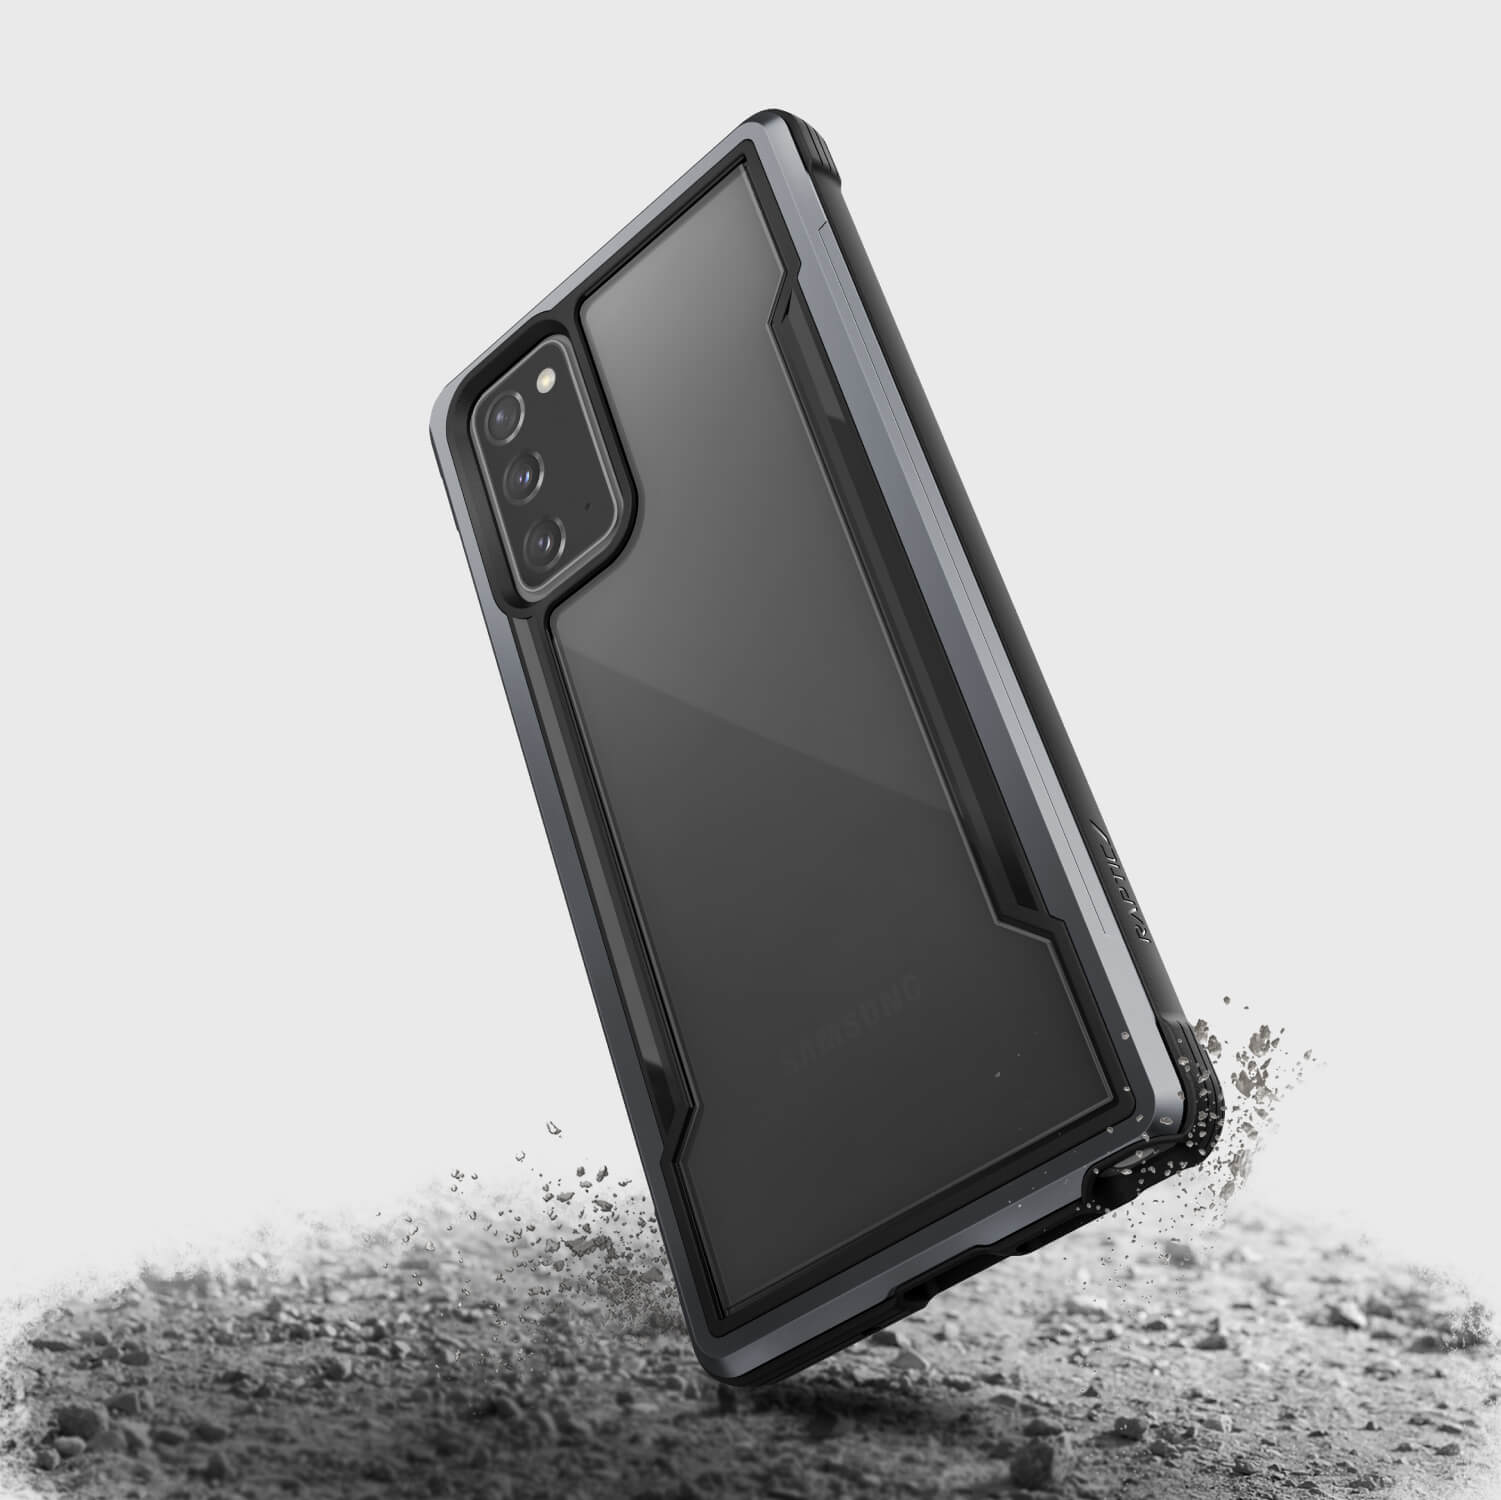 The Raptic Galaxy Note 20 Case - SHIELD Black offers drop protection and wireless charging compatibility.